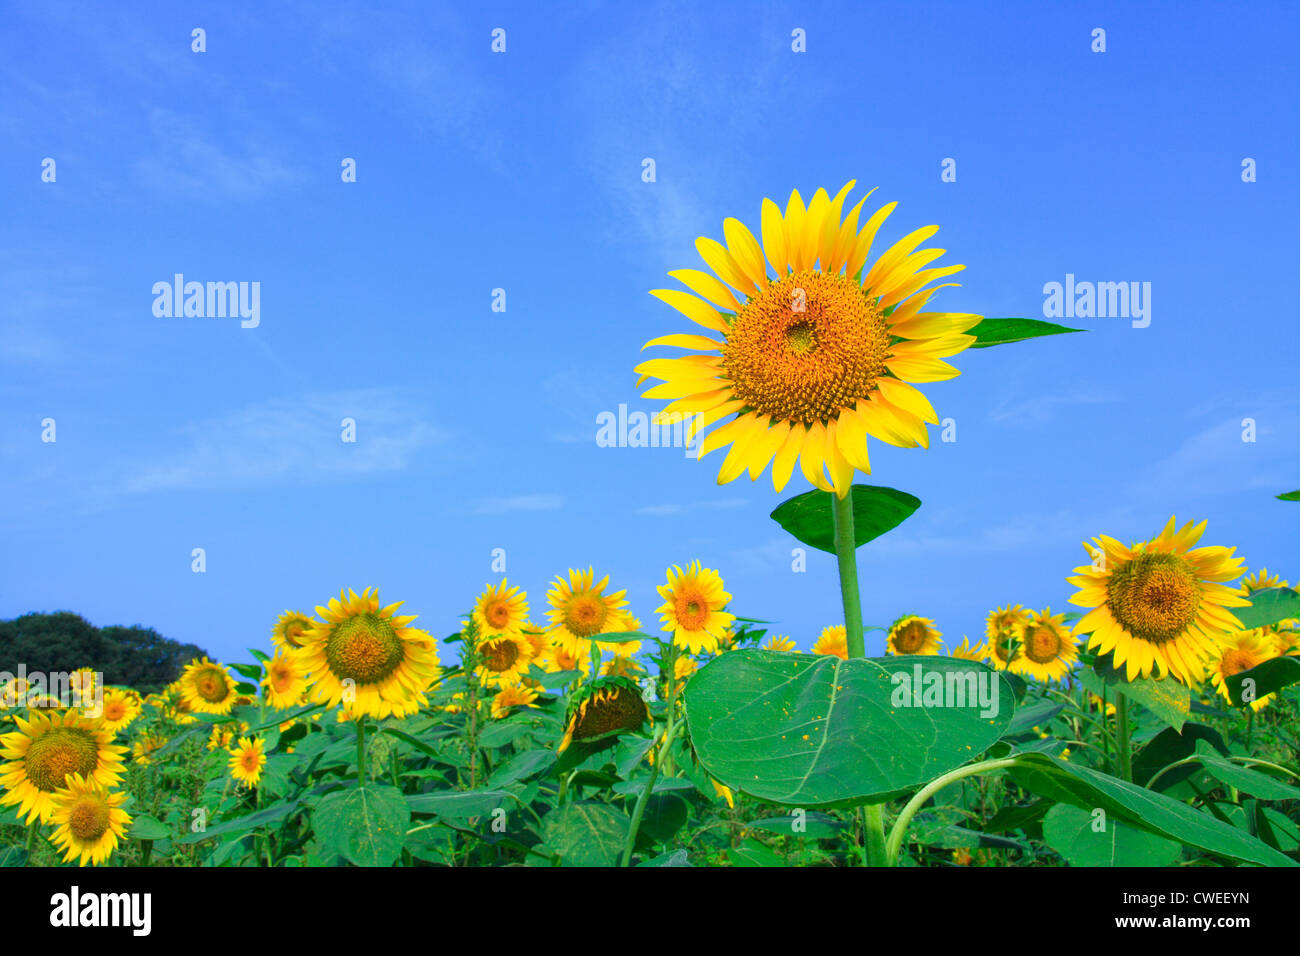 Sunflower Field And Blue Sky In Background Stock Photo